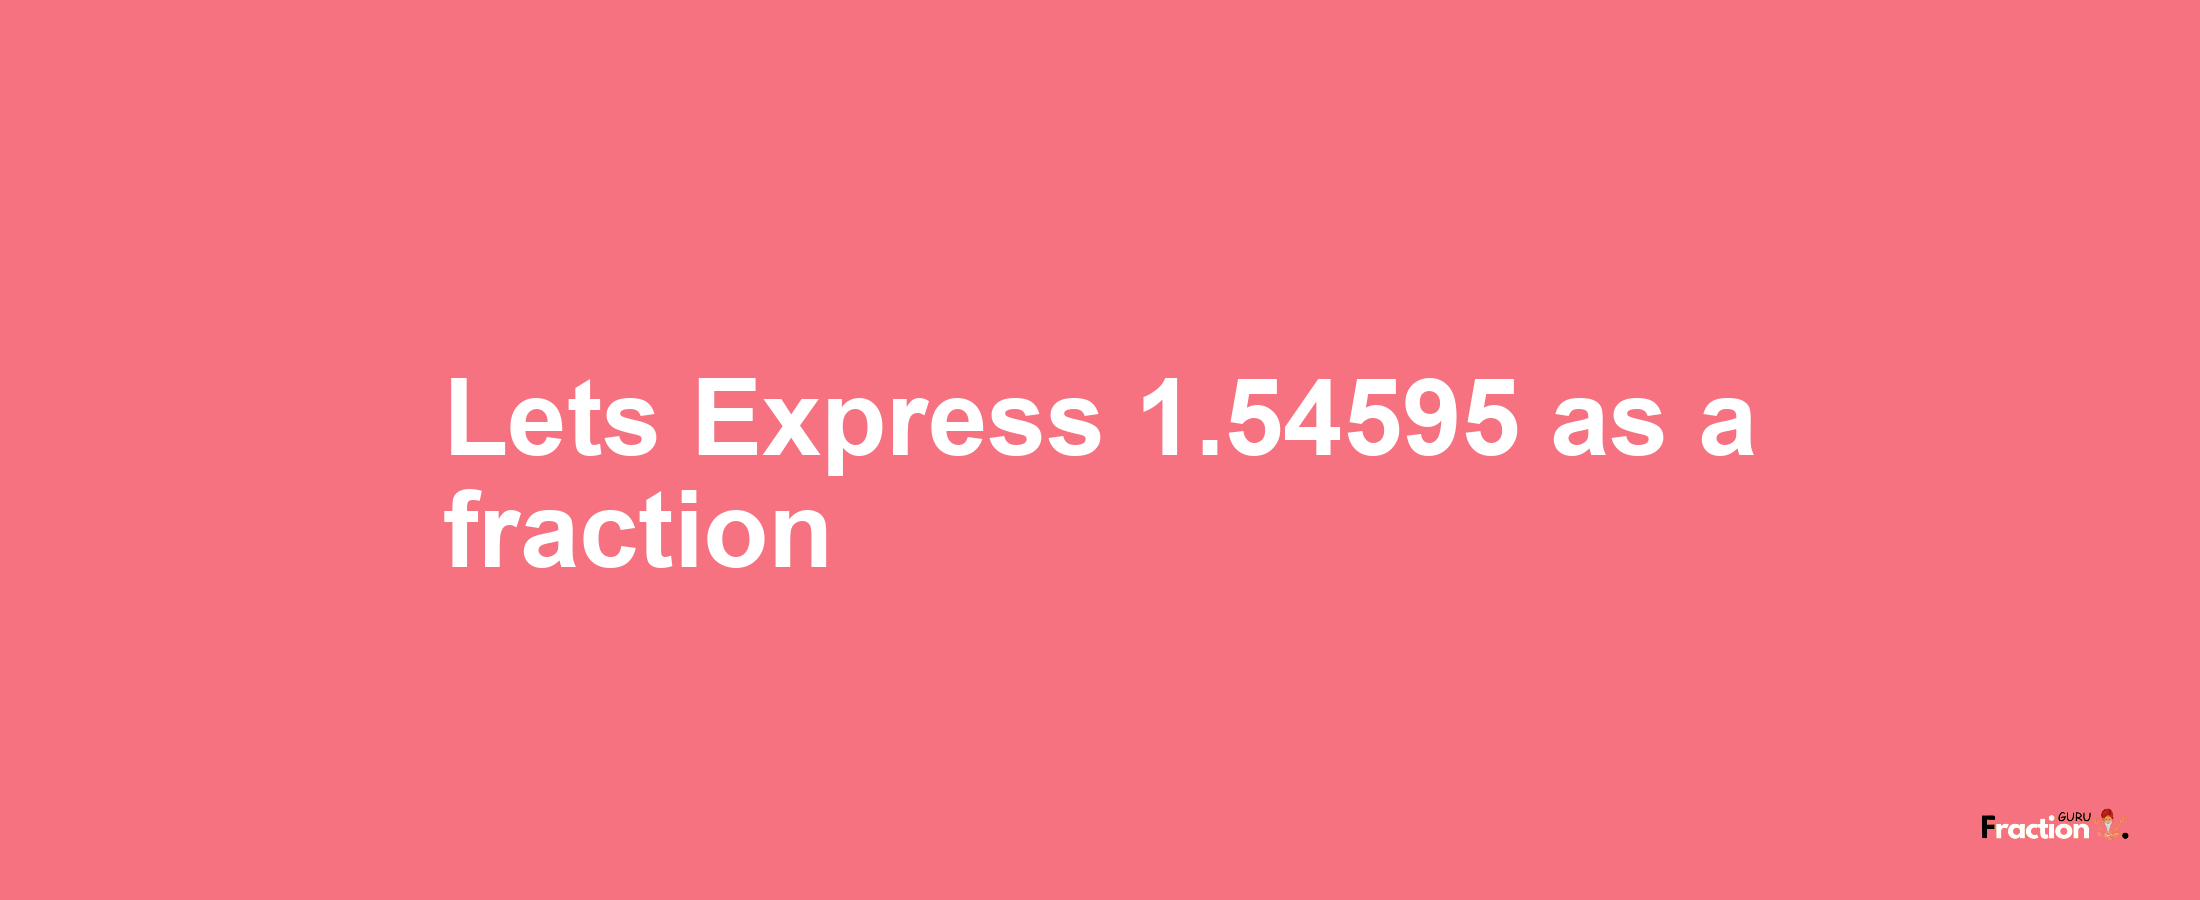 Lets Express 1.54595 as afraction